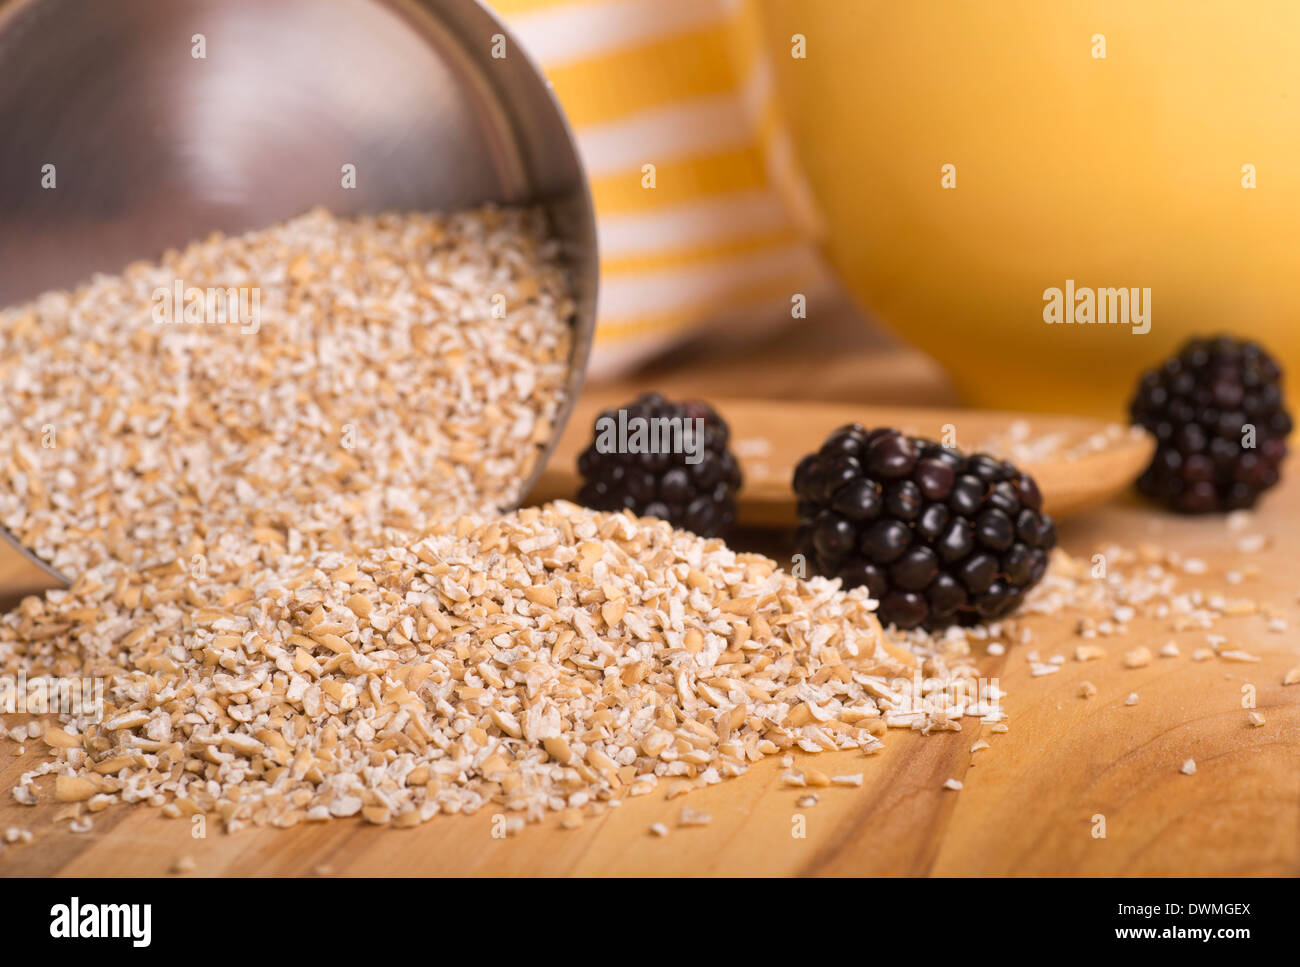 Healthy steelcut whole oats spilling out of a measuring cup with blackberries Stock Photo